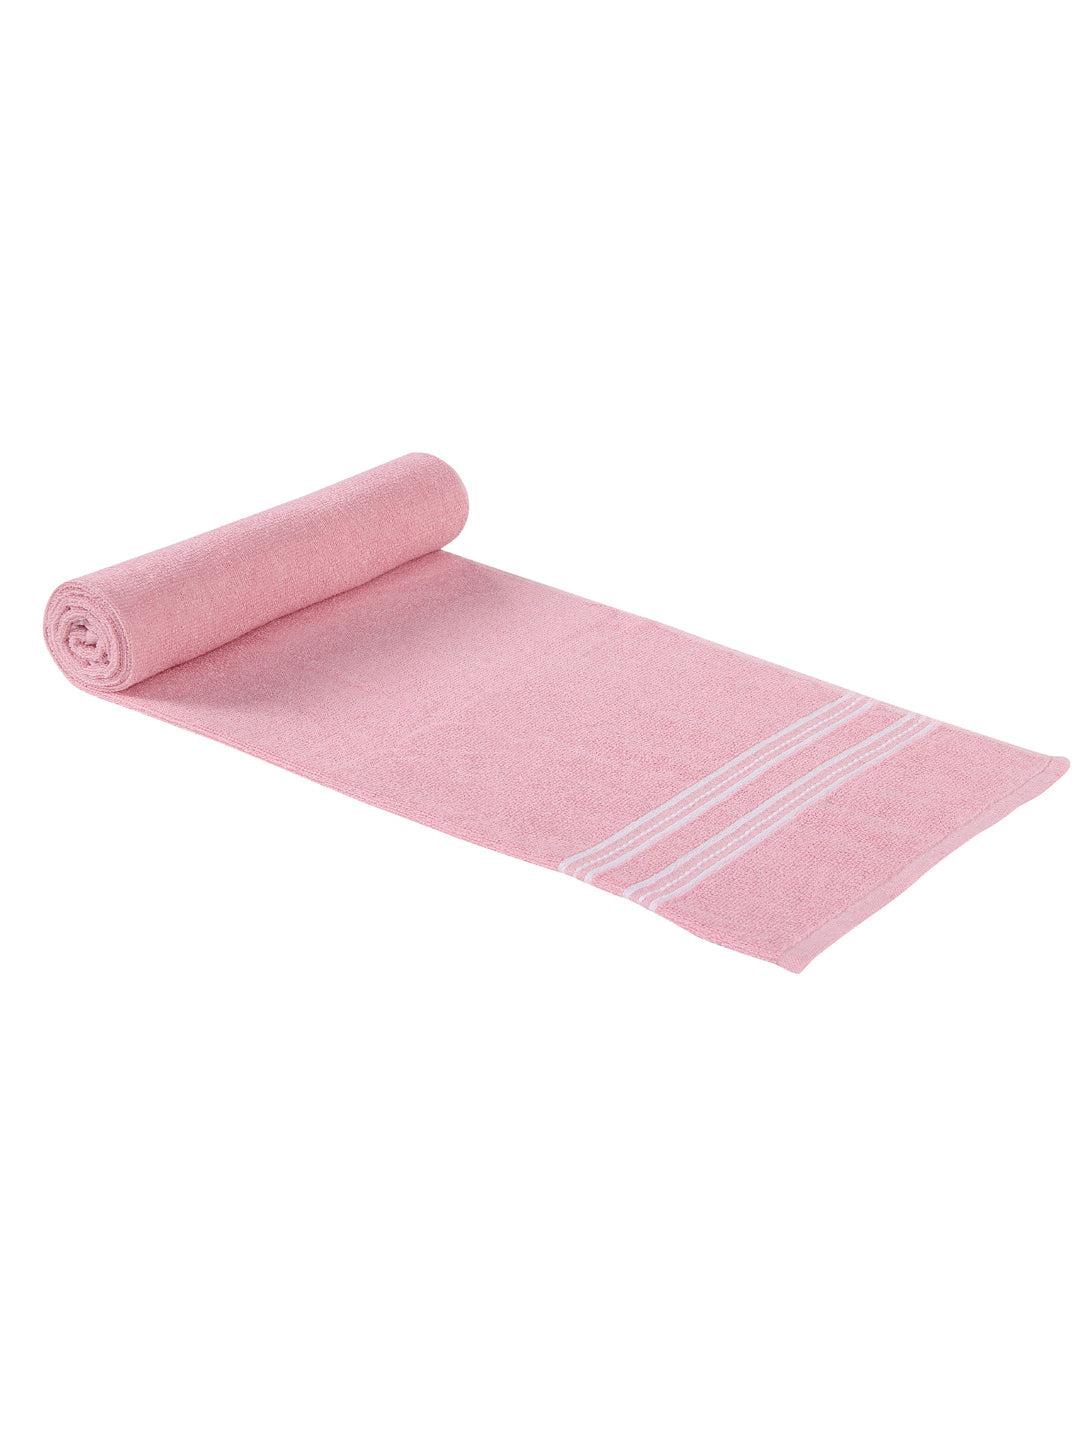 Yellow 400 GSM Cotton Bath Towel - Pack of 1